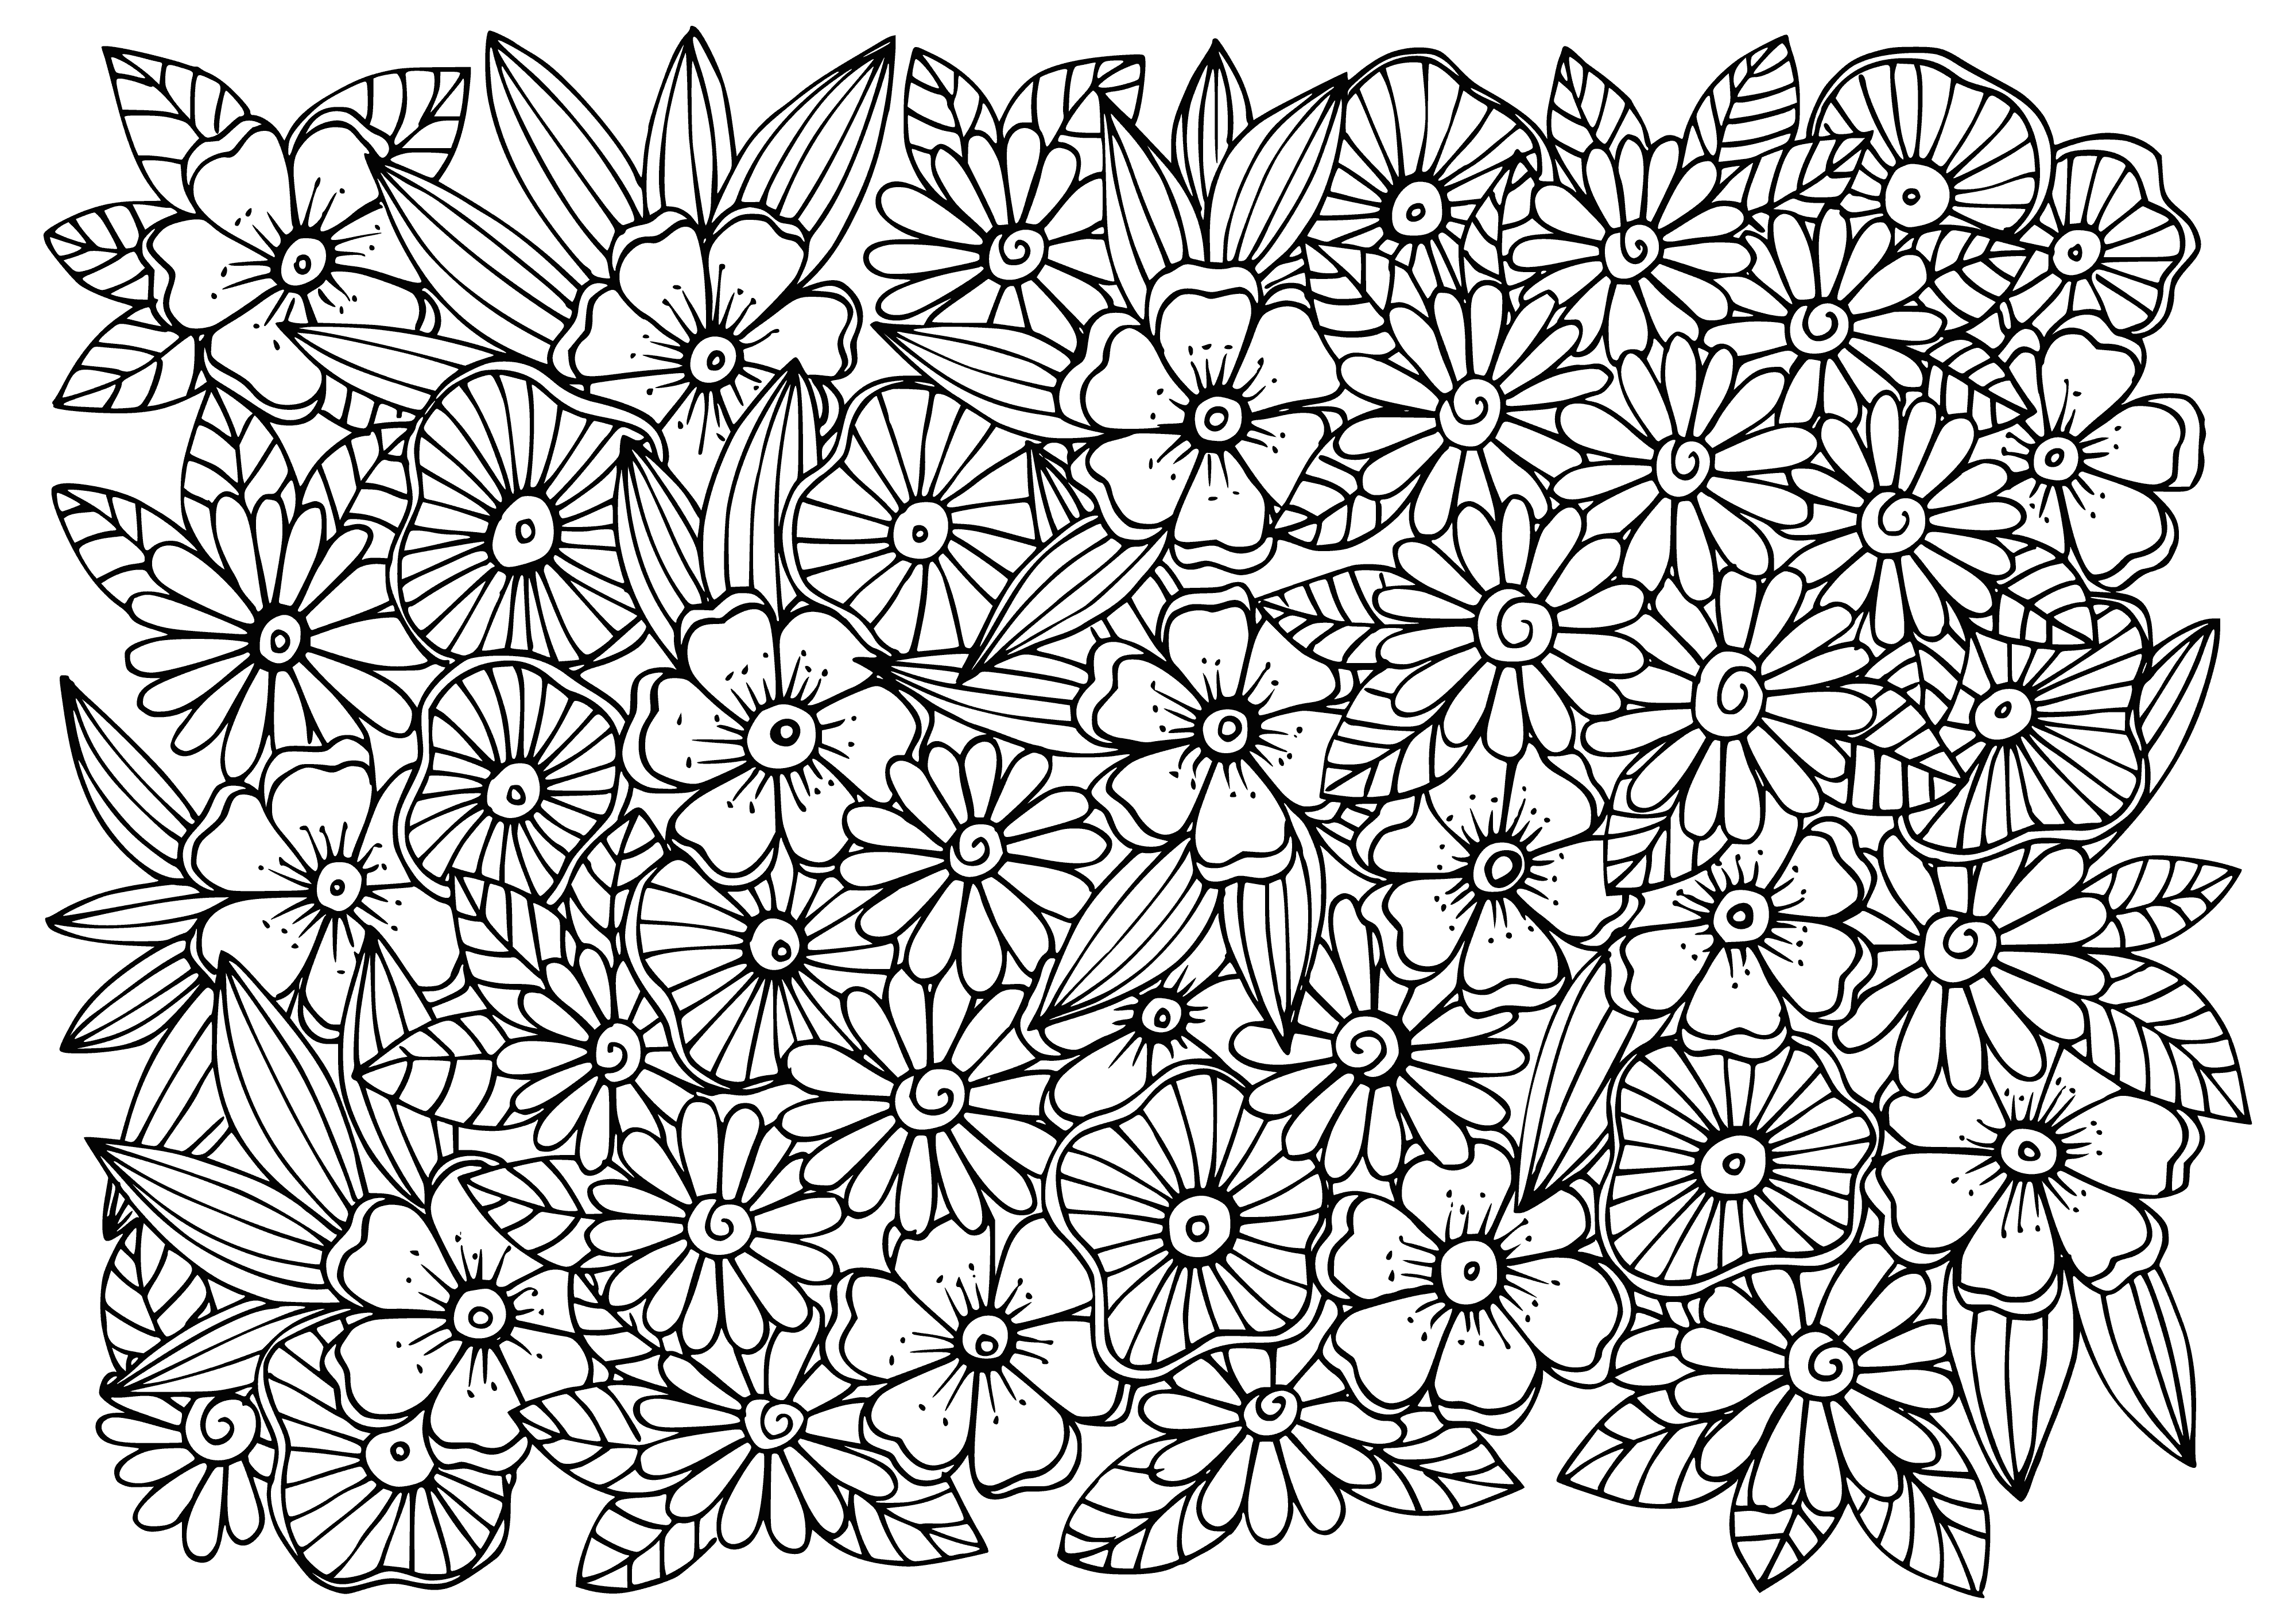 coloring page: Detailed flowers & leaves fill this coloring page, creating an intricate & eye-catching scene.